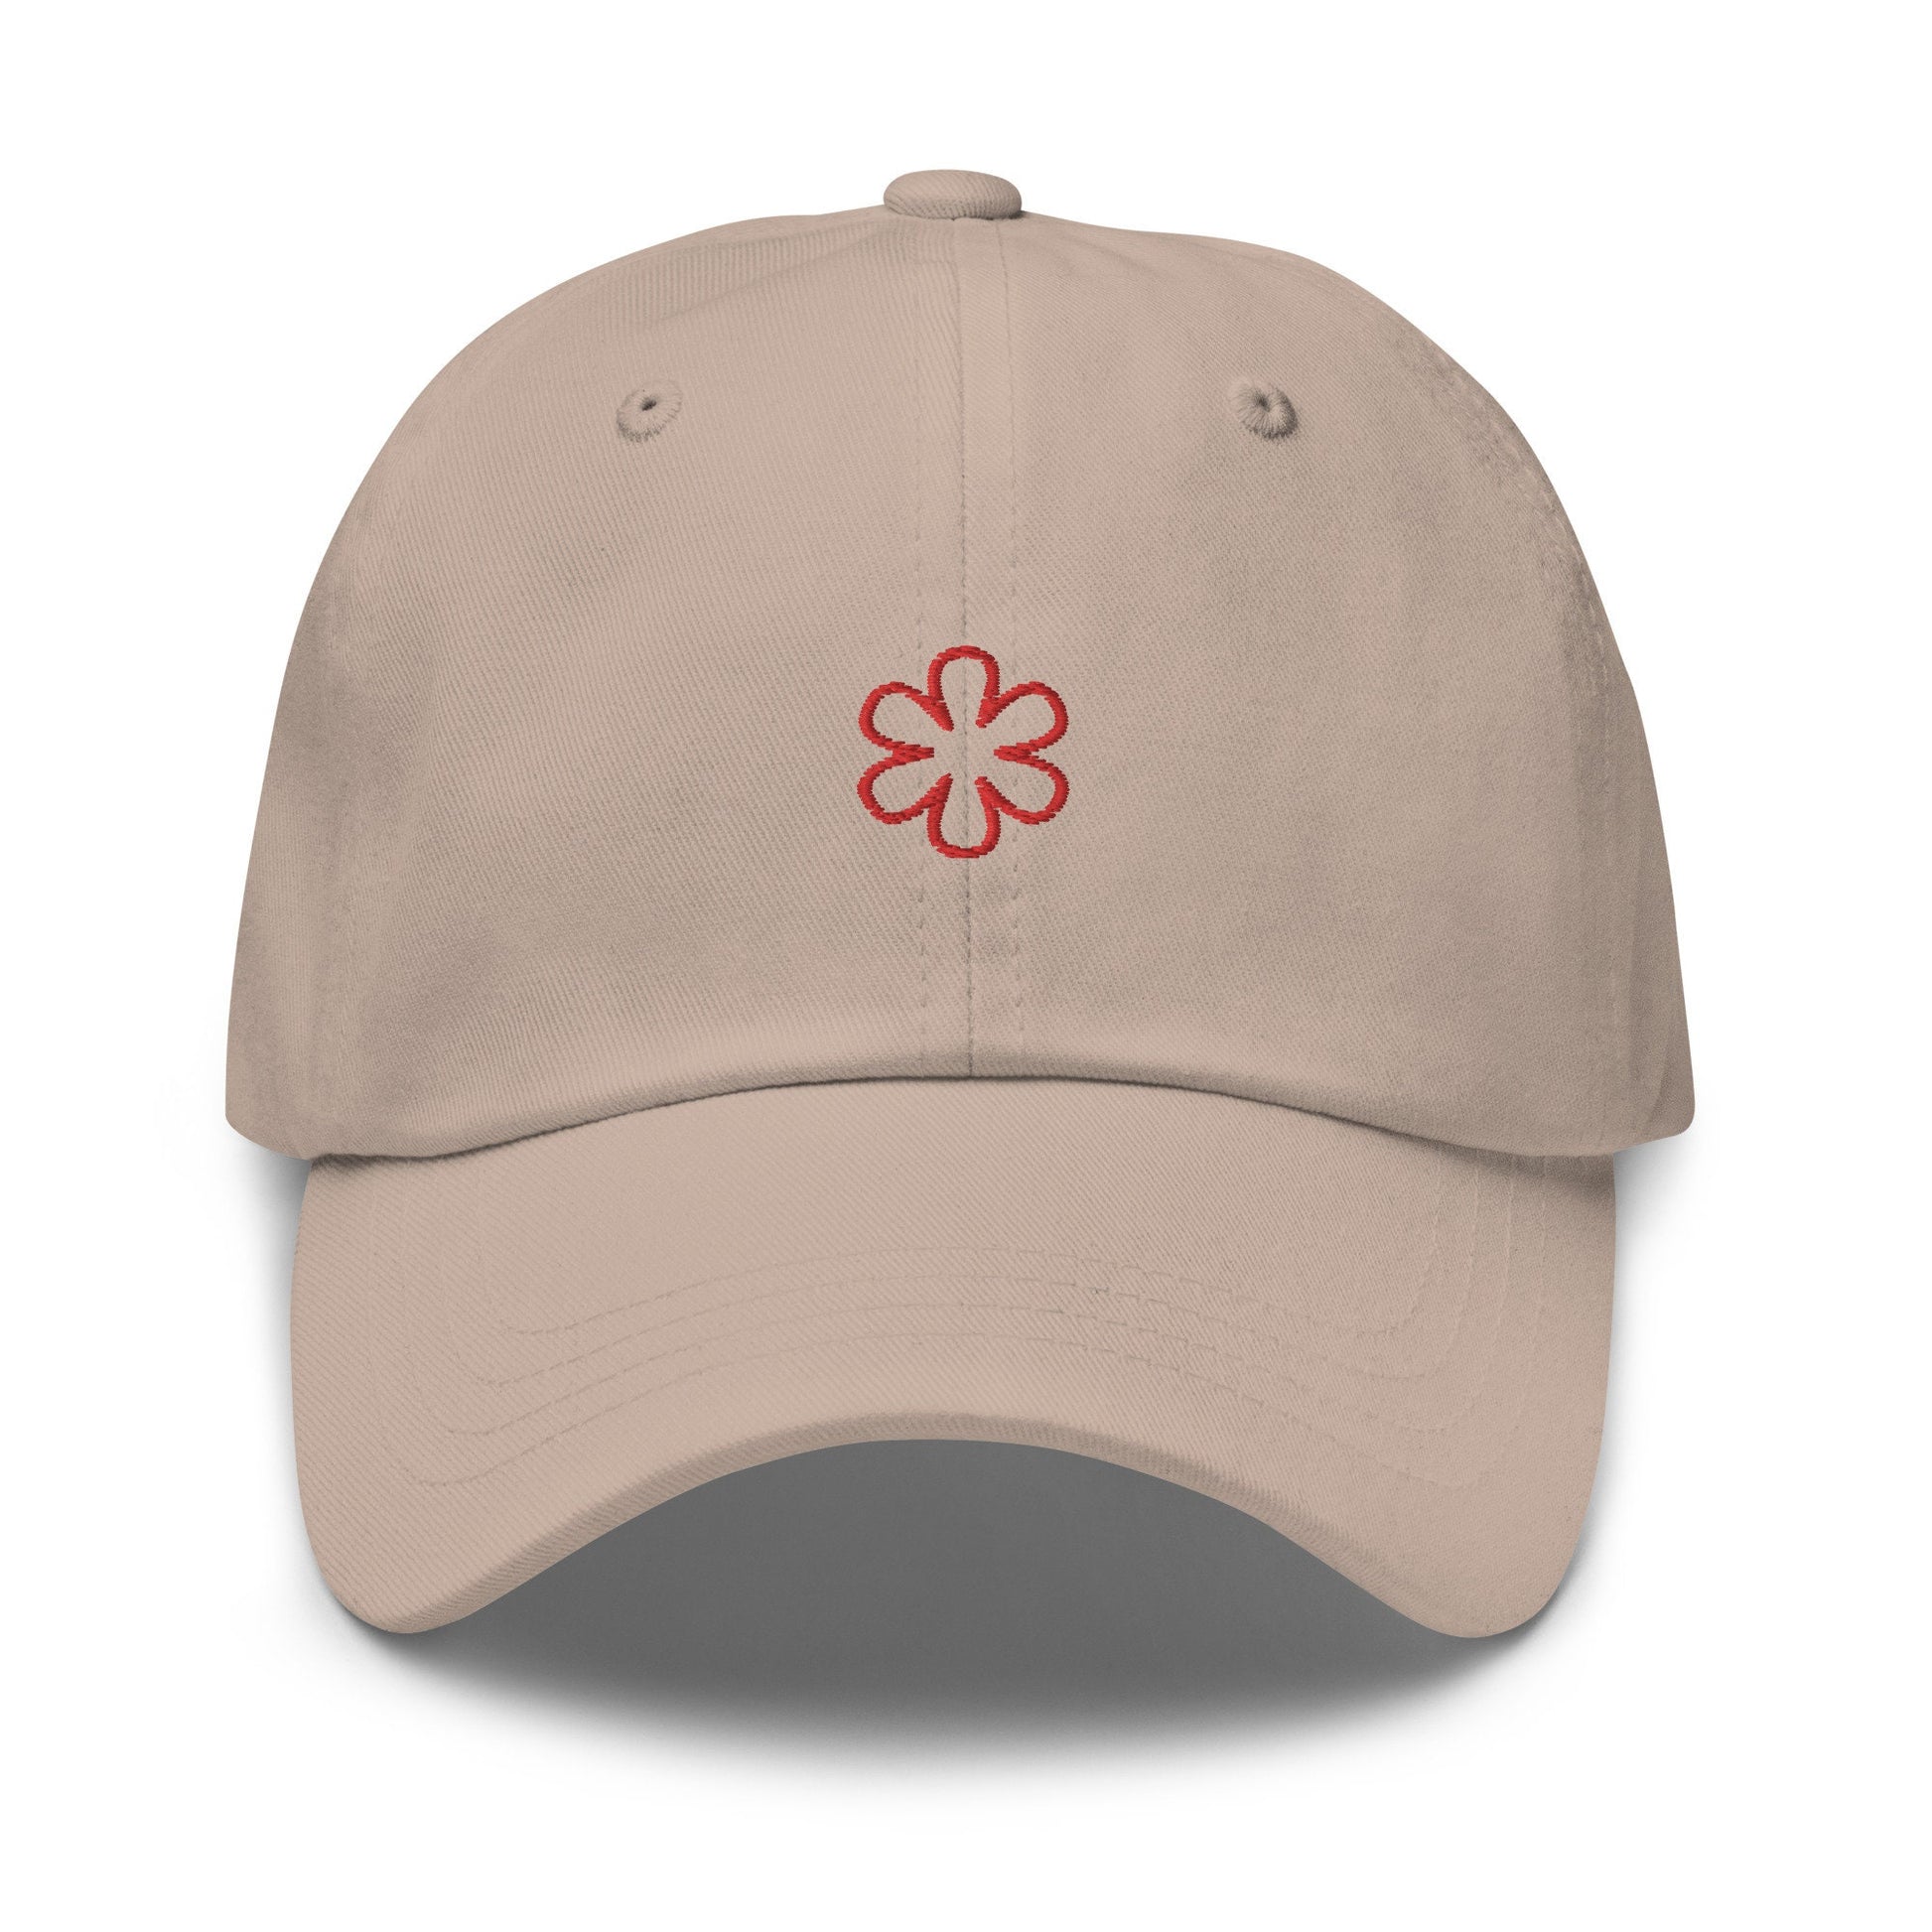 Michelin Star Inspired Dad Hat - Gift for Foodies & Home Chefs - Minimalist Embroidered Cotton Hat